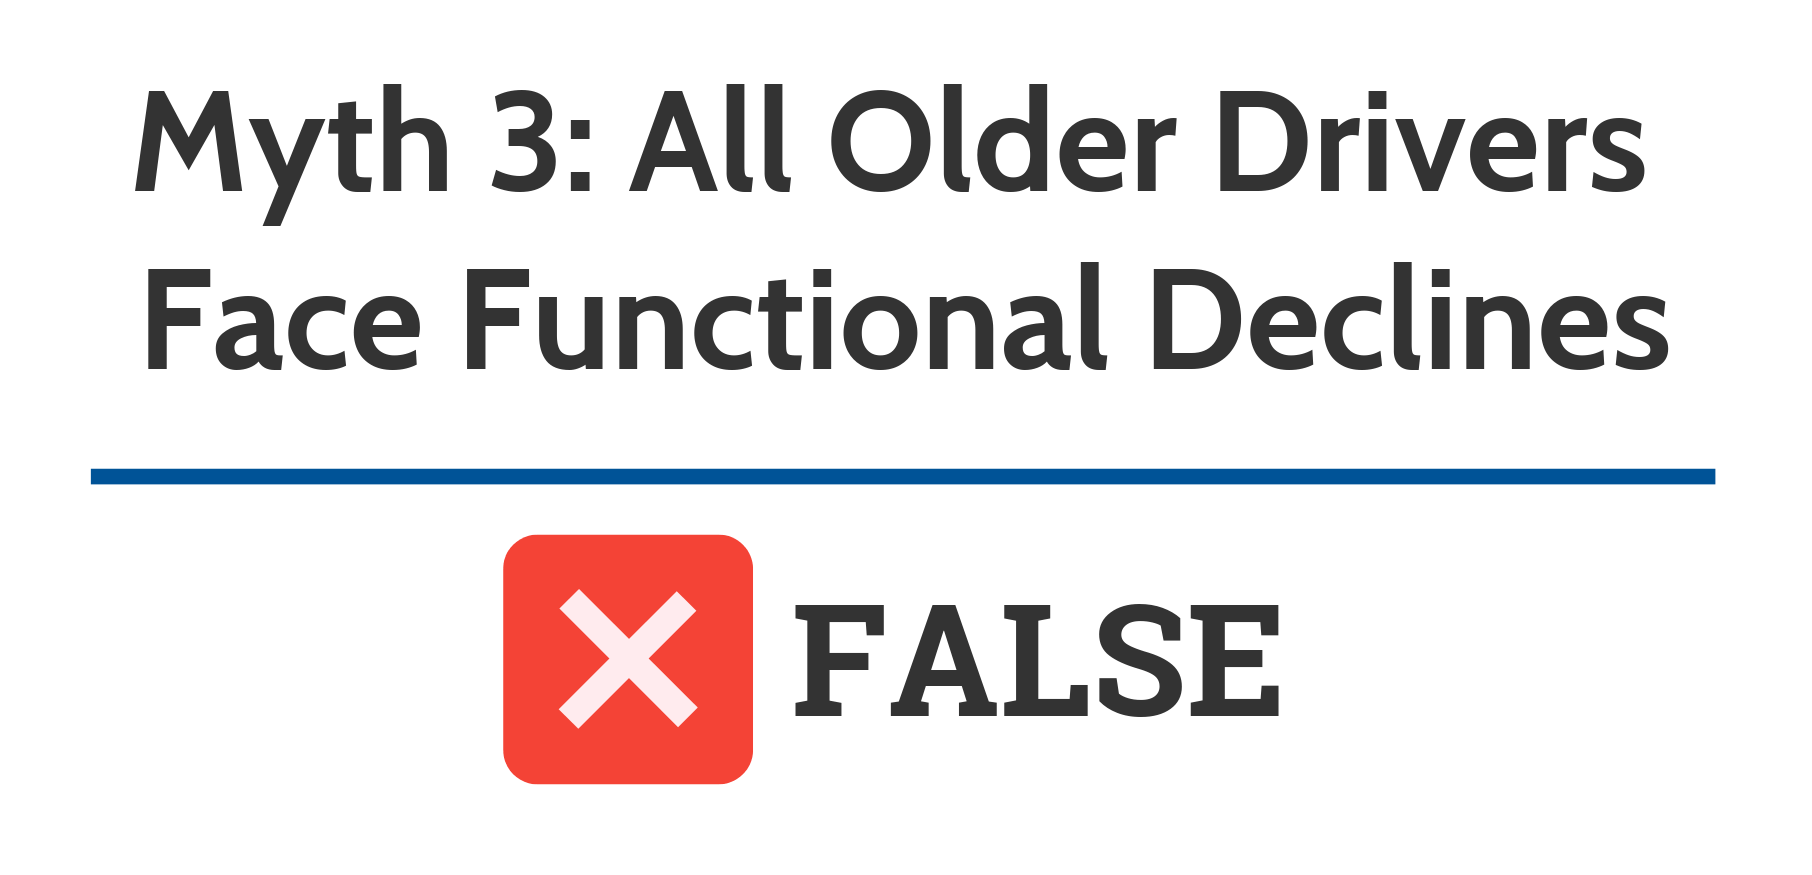 All Older Drivers Face Serious Functional Declines